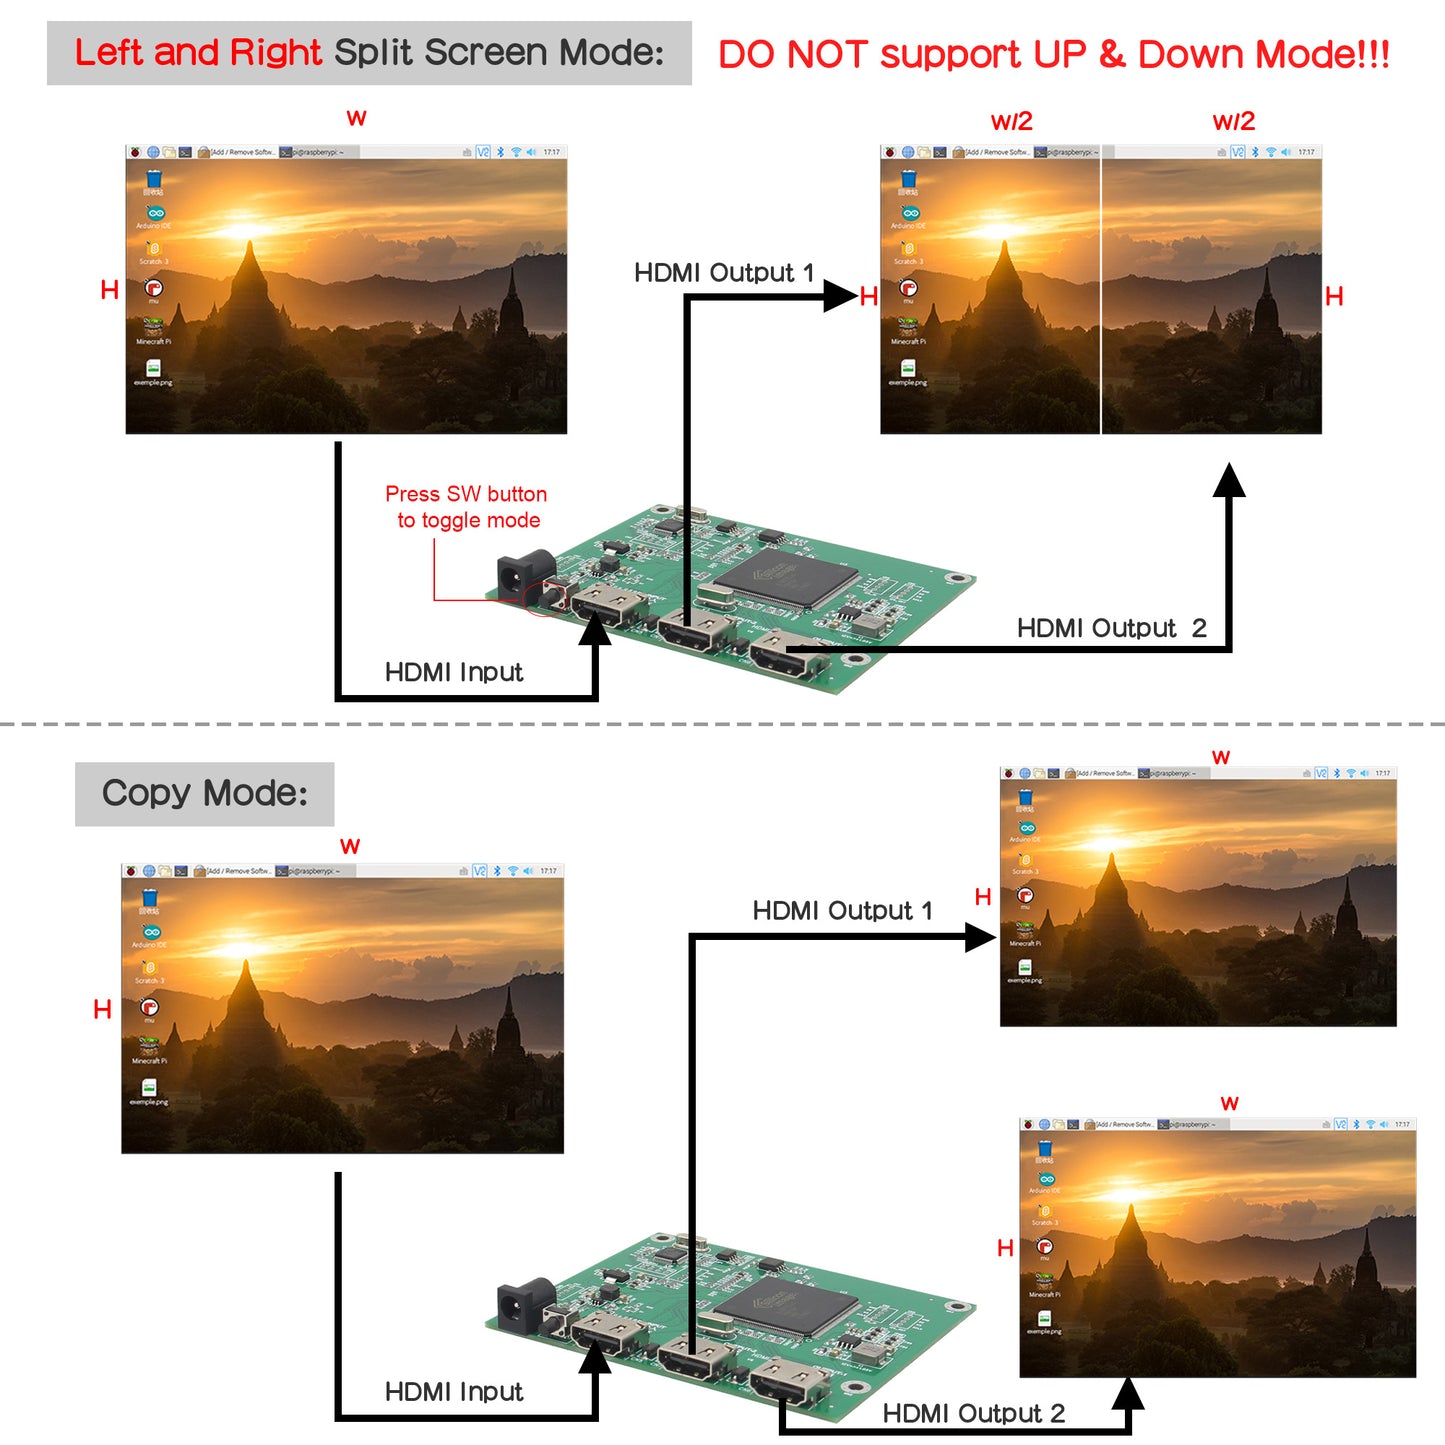 4K HDMI Screen Splitter 1 in 2 Out for Dual Monitors Duplicate/Left and Right Split Screen